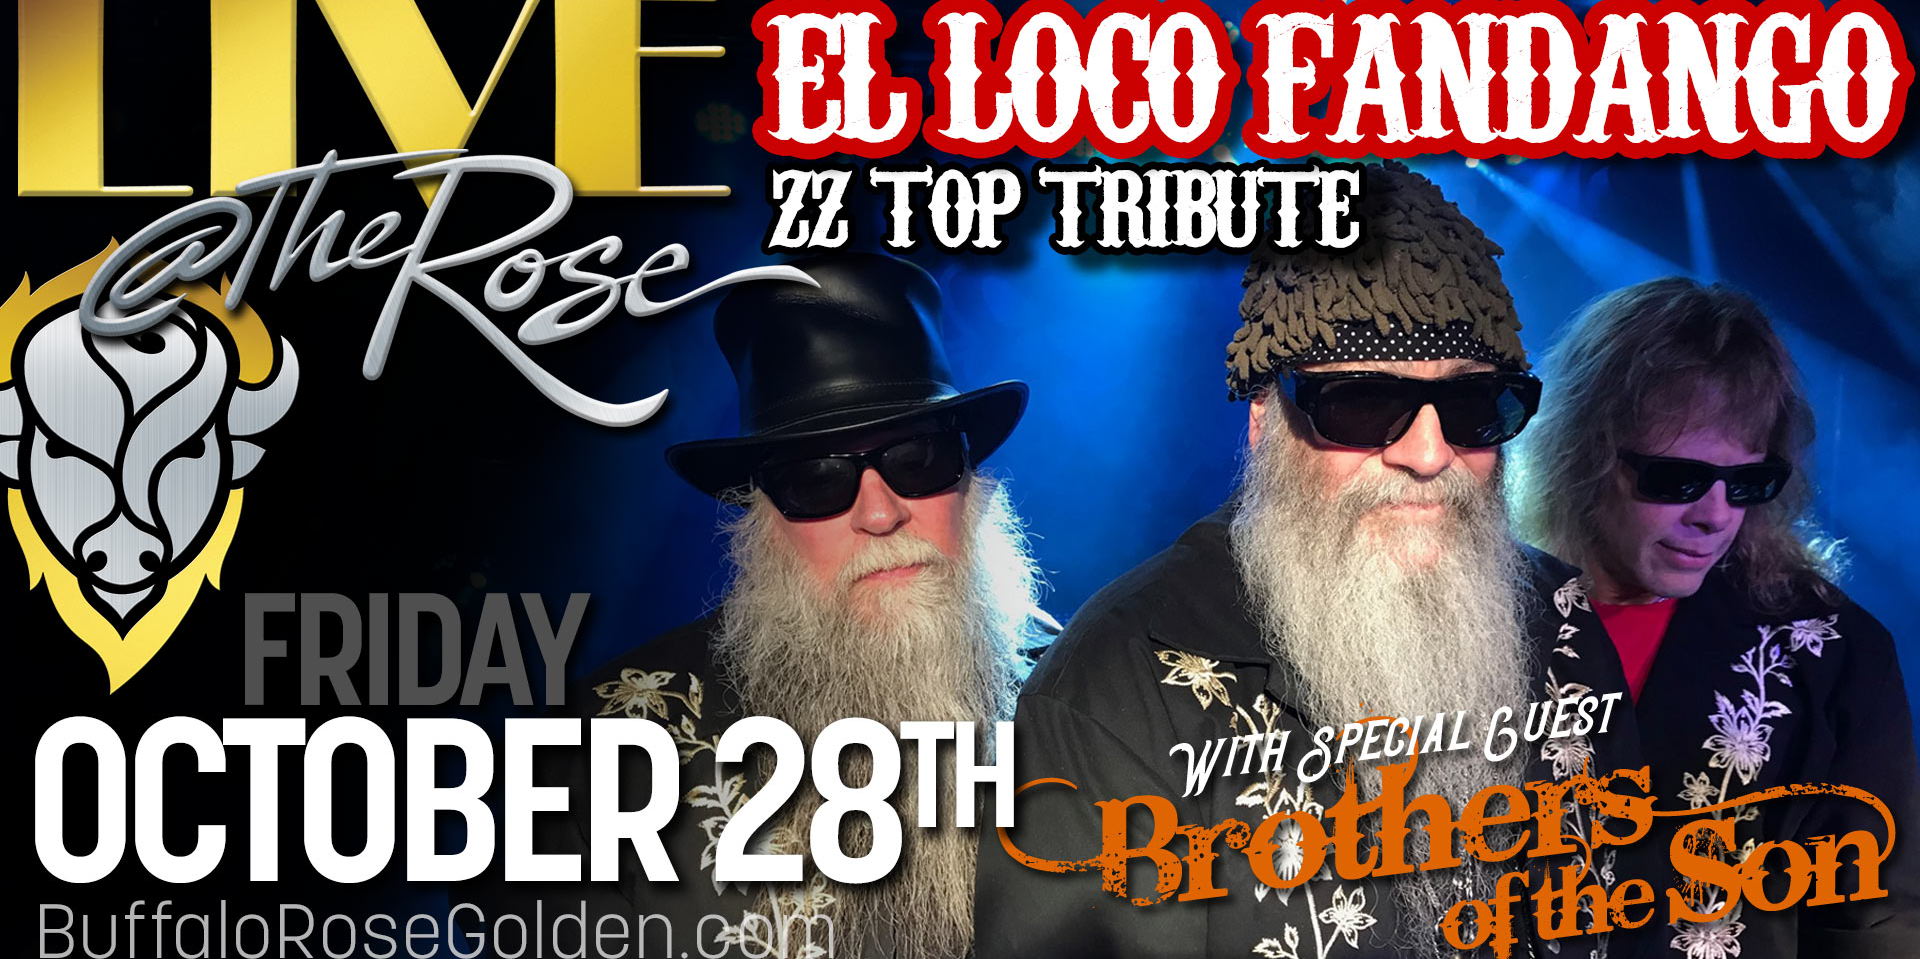 Live @ The Rose - El Loco Fandango with Special Guest Brothers of the Son promotional image